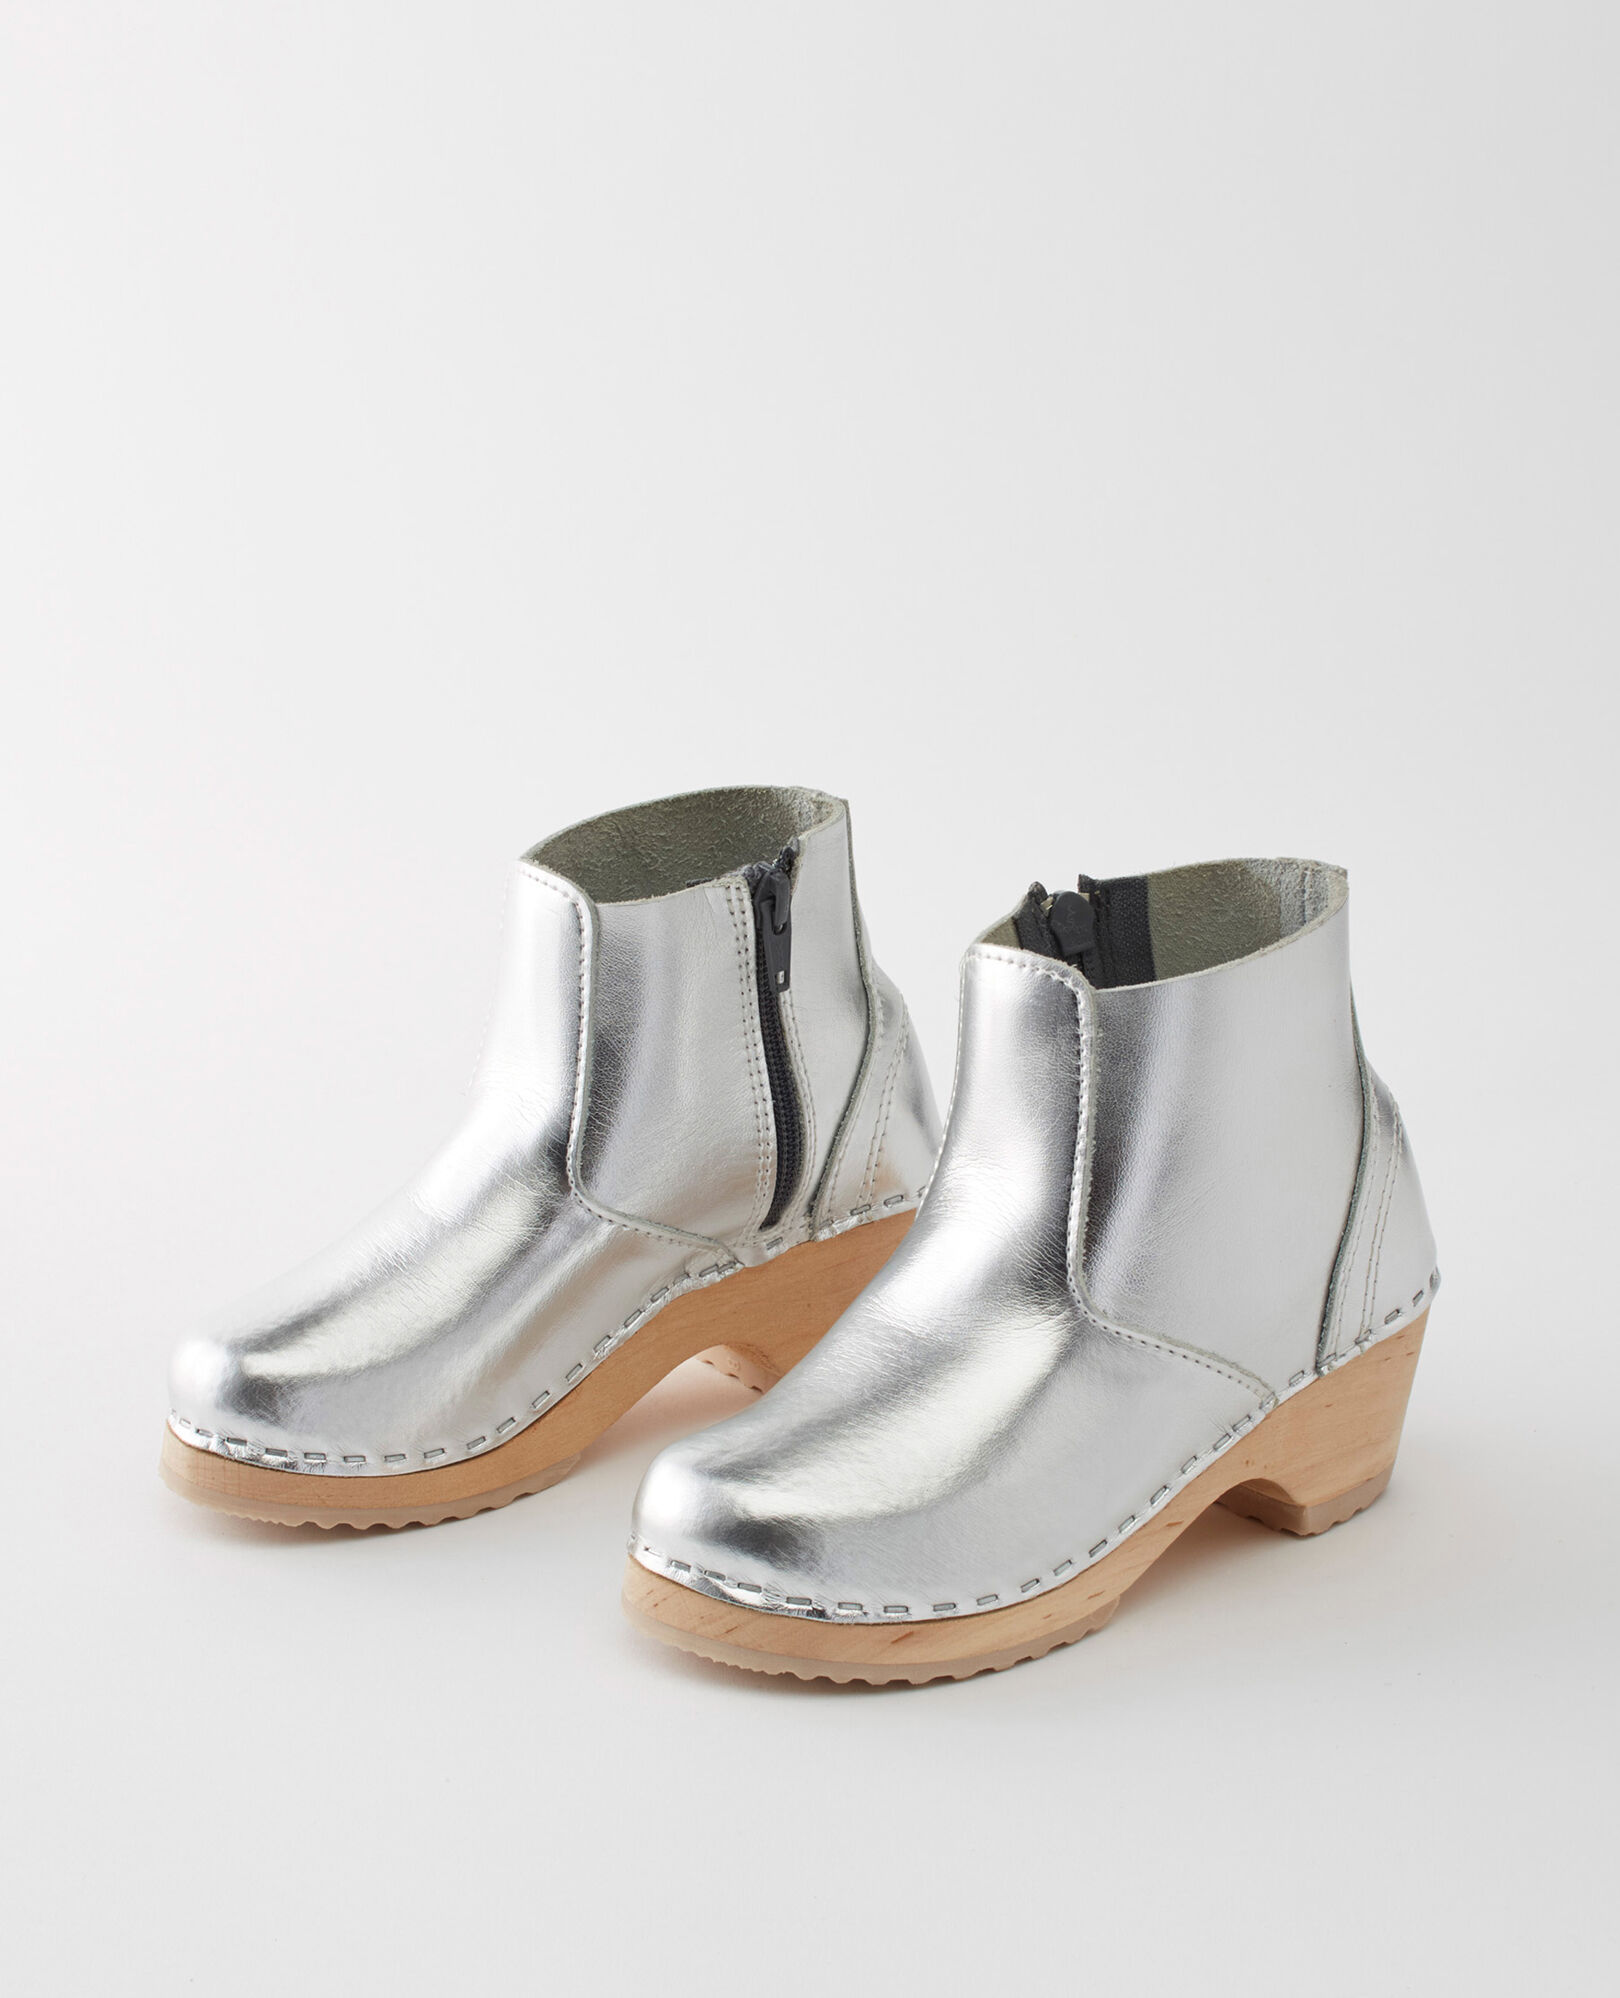 hanna andersson clog boots